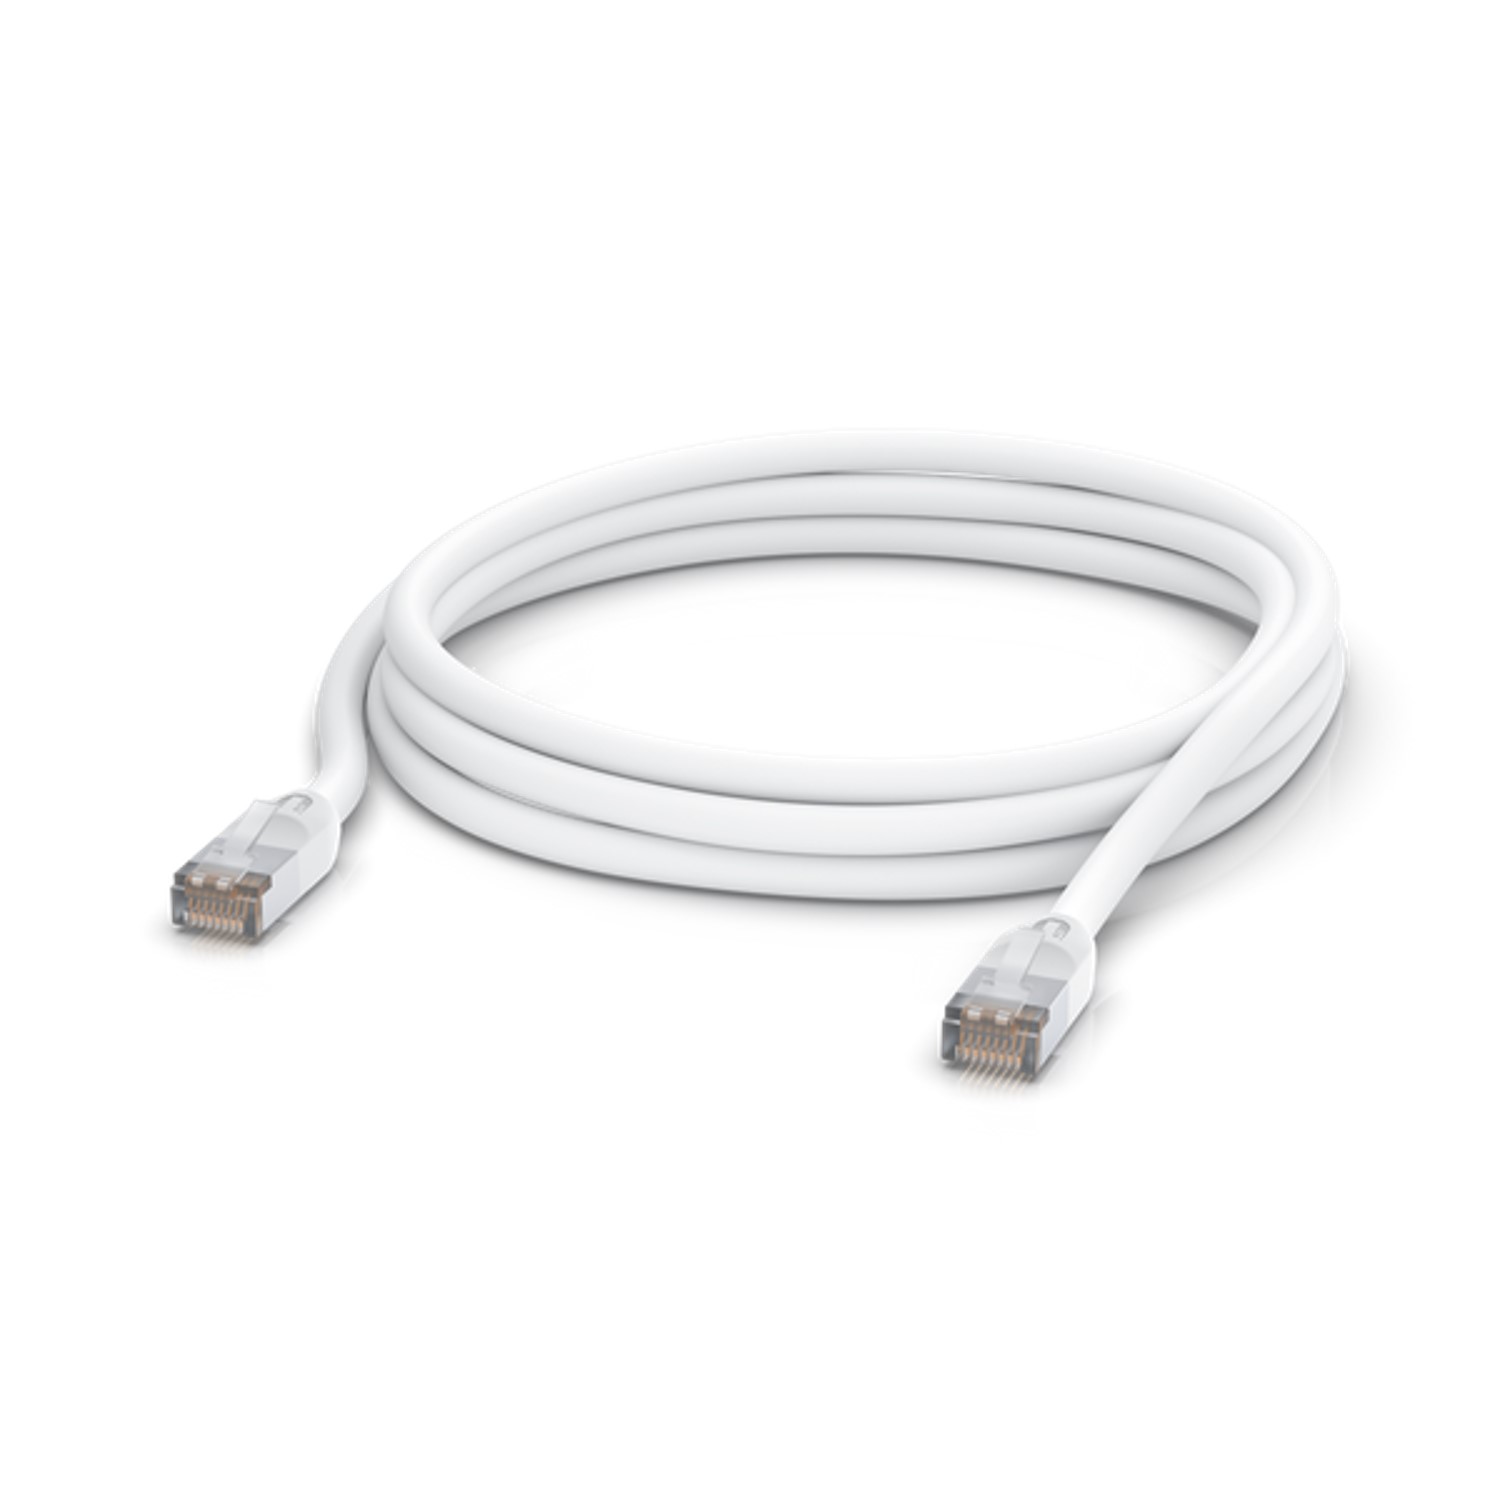 Ubiquiti UniFi Patch Cable Outdoor 3M White, Single Unit, All-weather, RJ45 Ethernet Cable, Category 5e, Incl 2Yr Warr